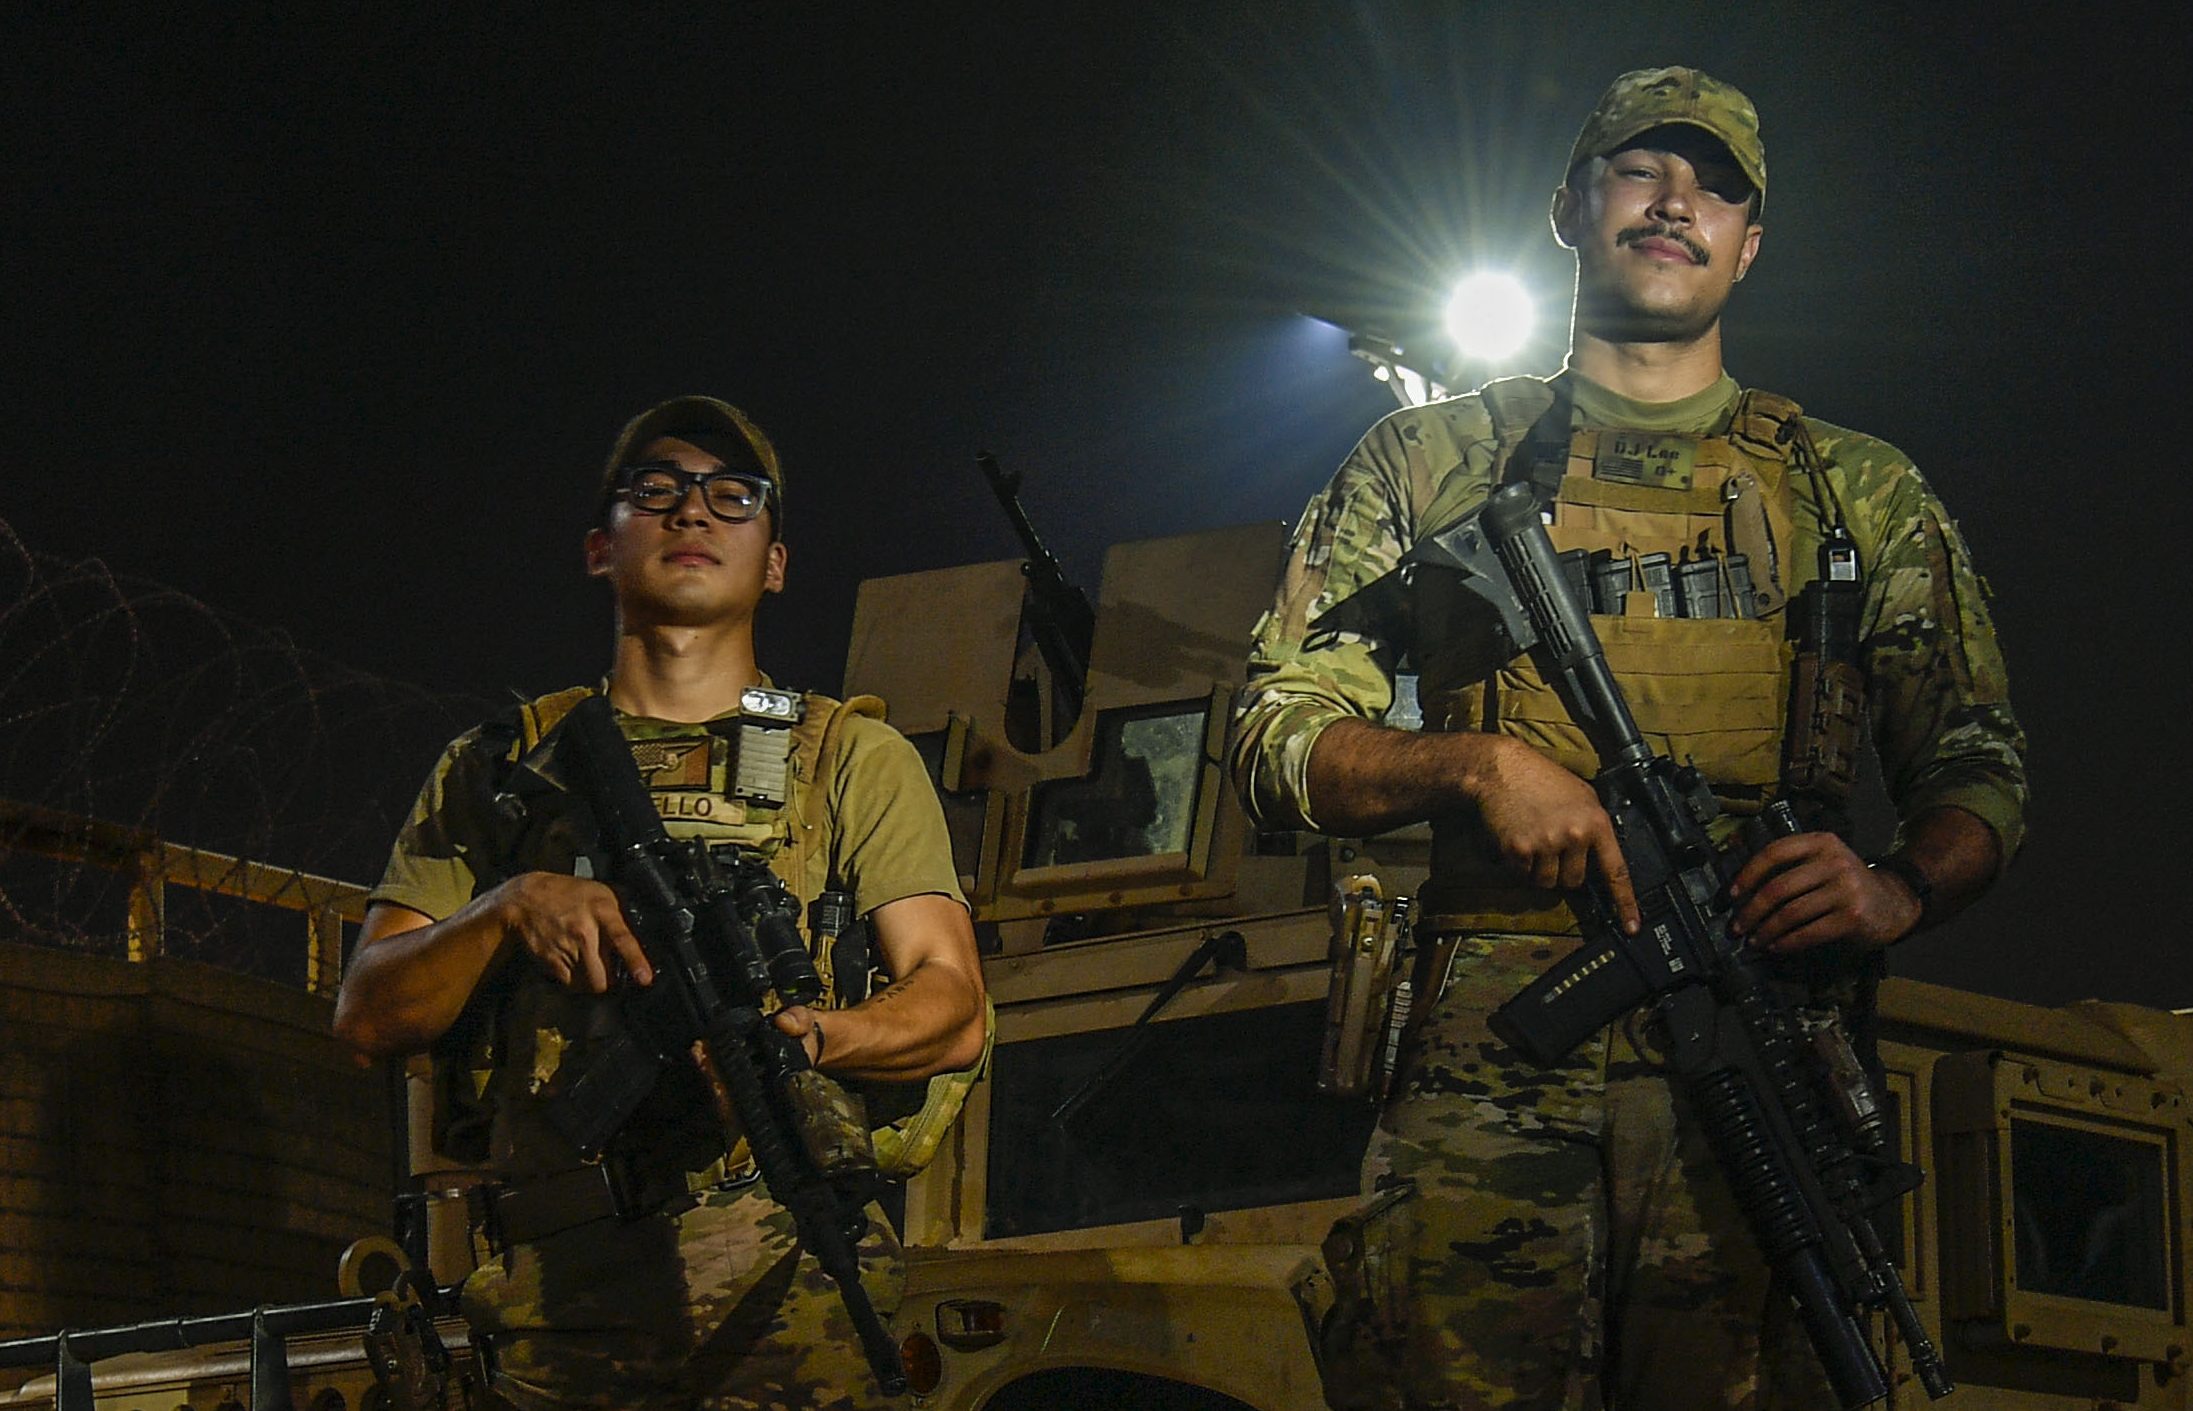 U.S. Air Force Airman 1st Class Luis Fernando Tello and Airman 1st Class Kameron Lee, 768 Expeditionary Air Base Squadron Security Forces Flight Response Force Airmen, at Air Base 101, Niamey, Niger, March 1, 2022. The 768th Expeditionary Air Base Squadron, plays a key role in counter-violent extremism operations in the Sahel by providing infrastructure, sustainment, operational mission generation, and base defense. Security Forces Airmen provide defense-in-depth while strengthening relationships with Nigerien security forces, primarily the Forces Armées Nigériennes (FAN), in support of more stable, prosperous Africa. (U.S. Air Force photo by Staff Sgt. Nicholas Byers)